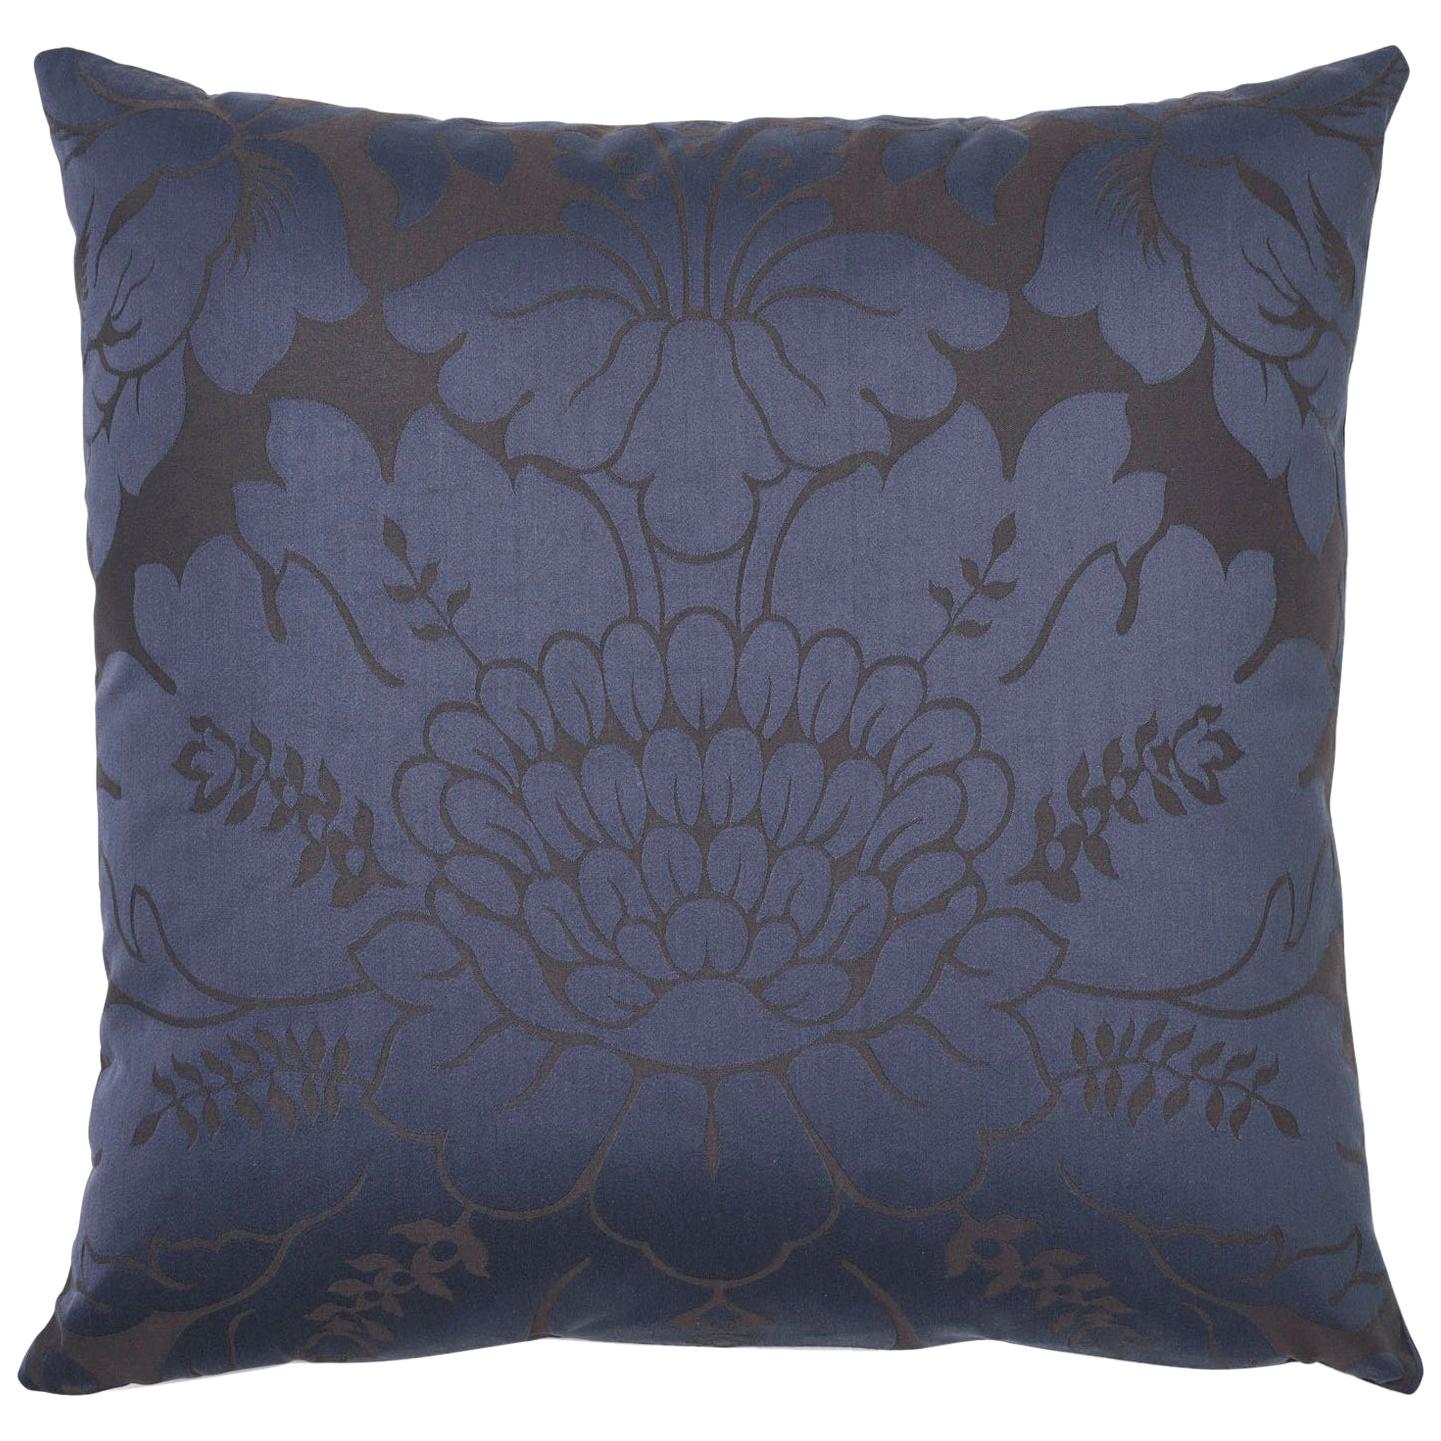 Schumacher Maggiore Damasco Midnight Two-Sided Cotton Pillow For Sale